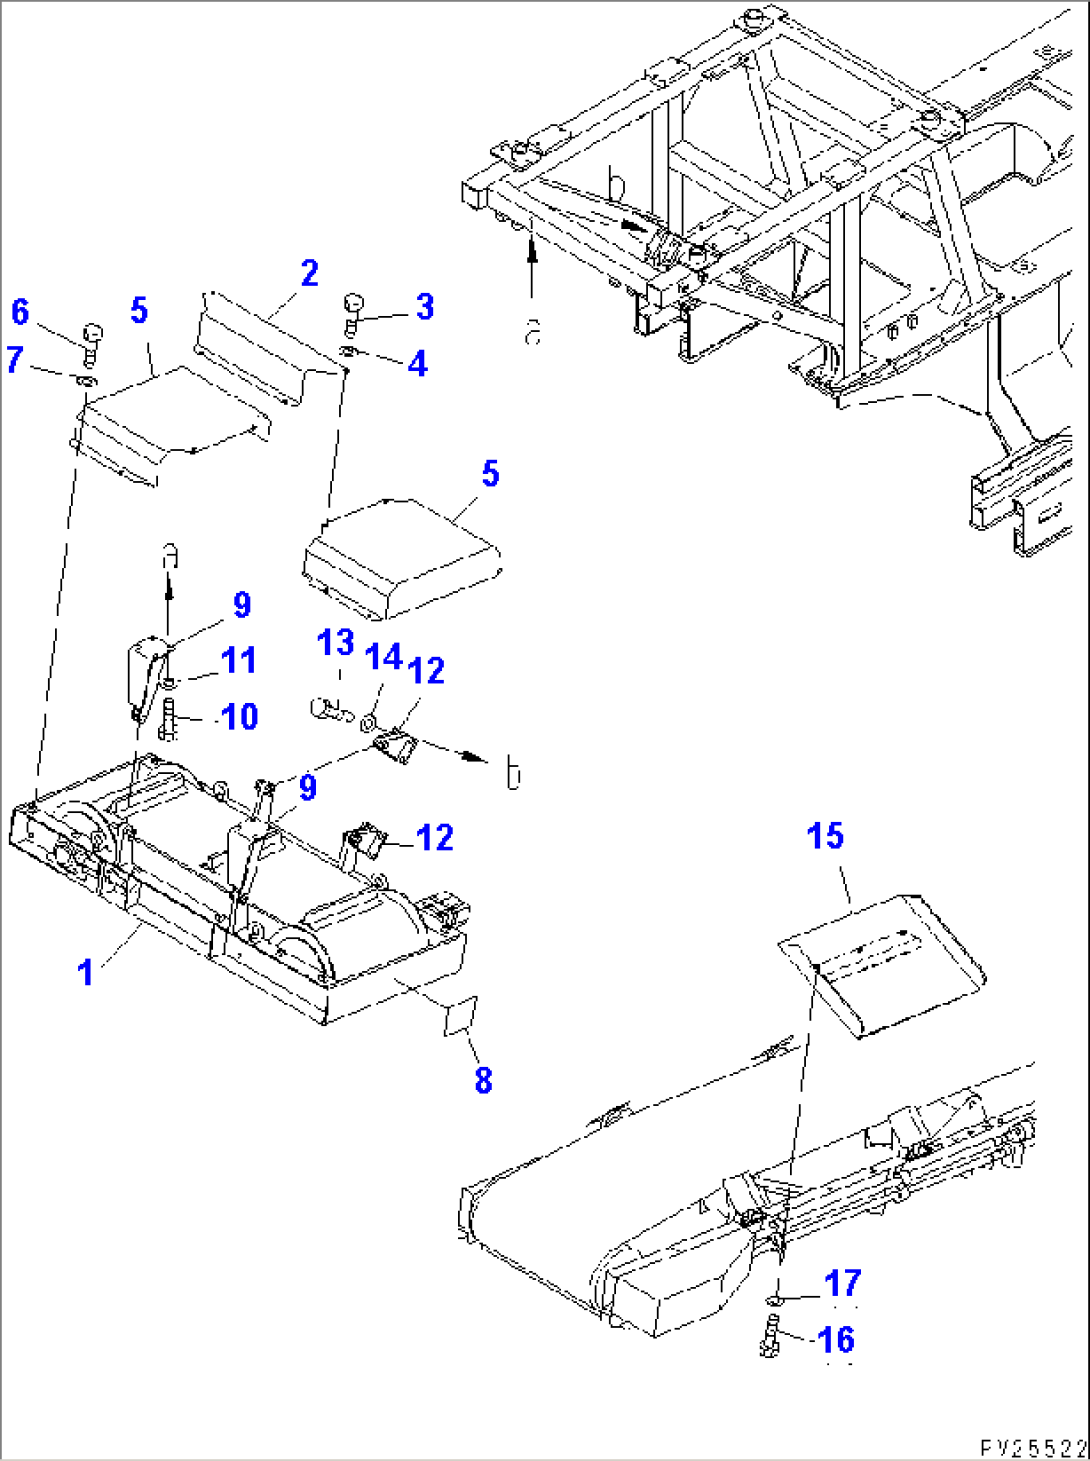 MAGNETIC SEPARATOR AND PIPING (1/2)(#1101-)